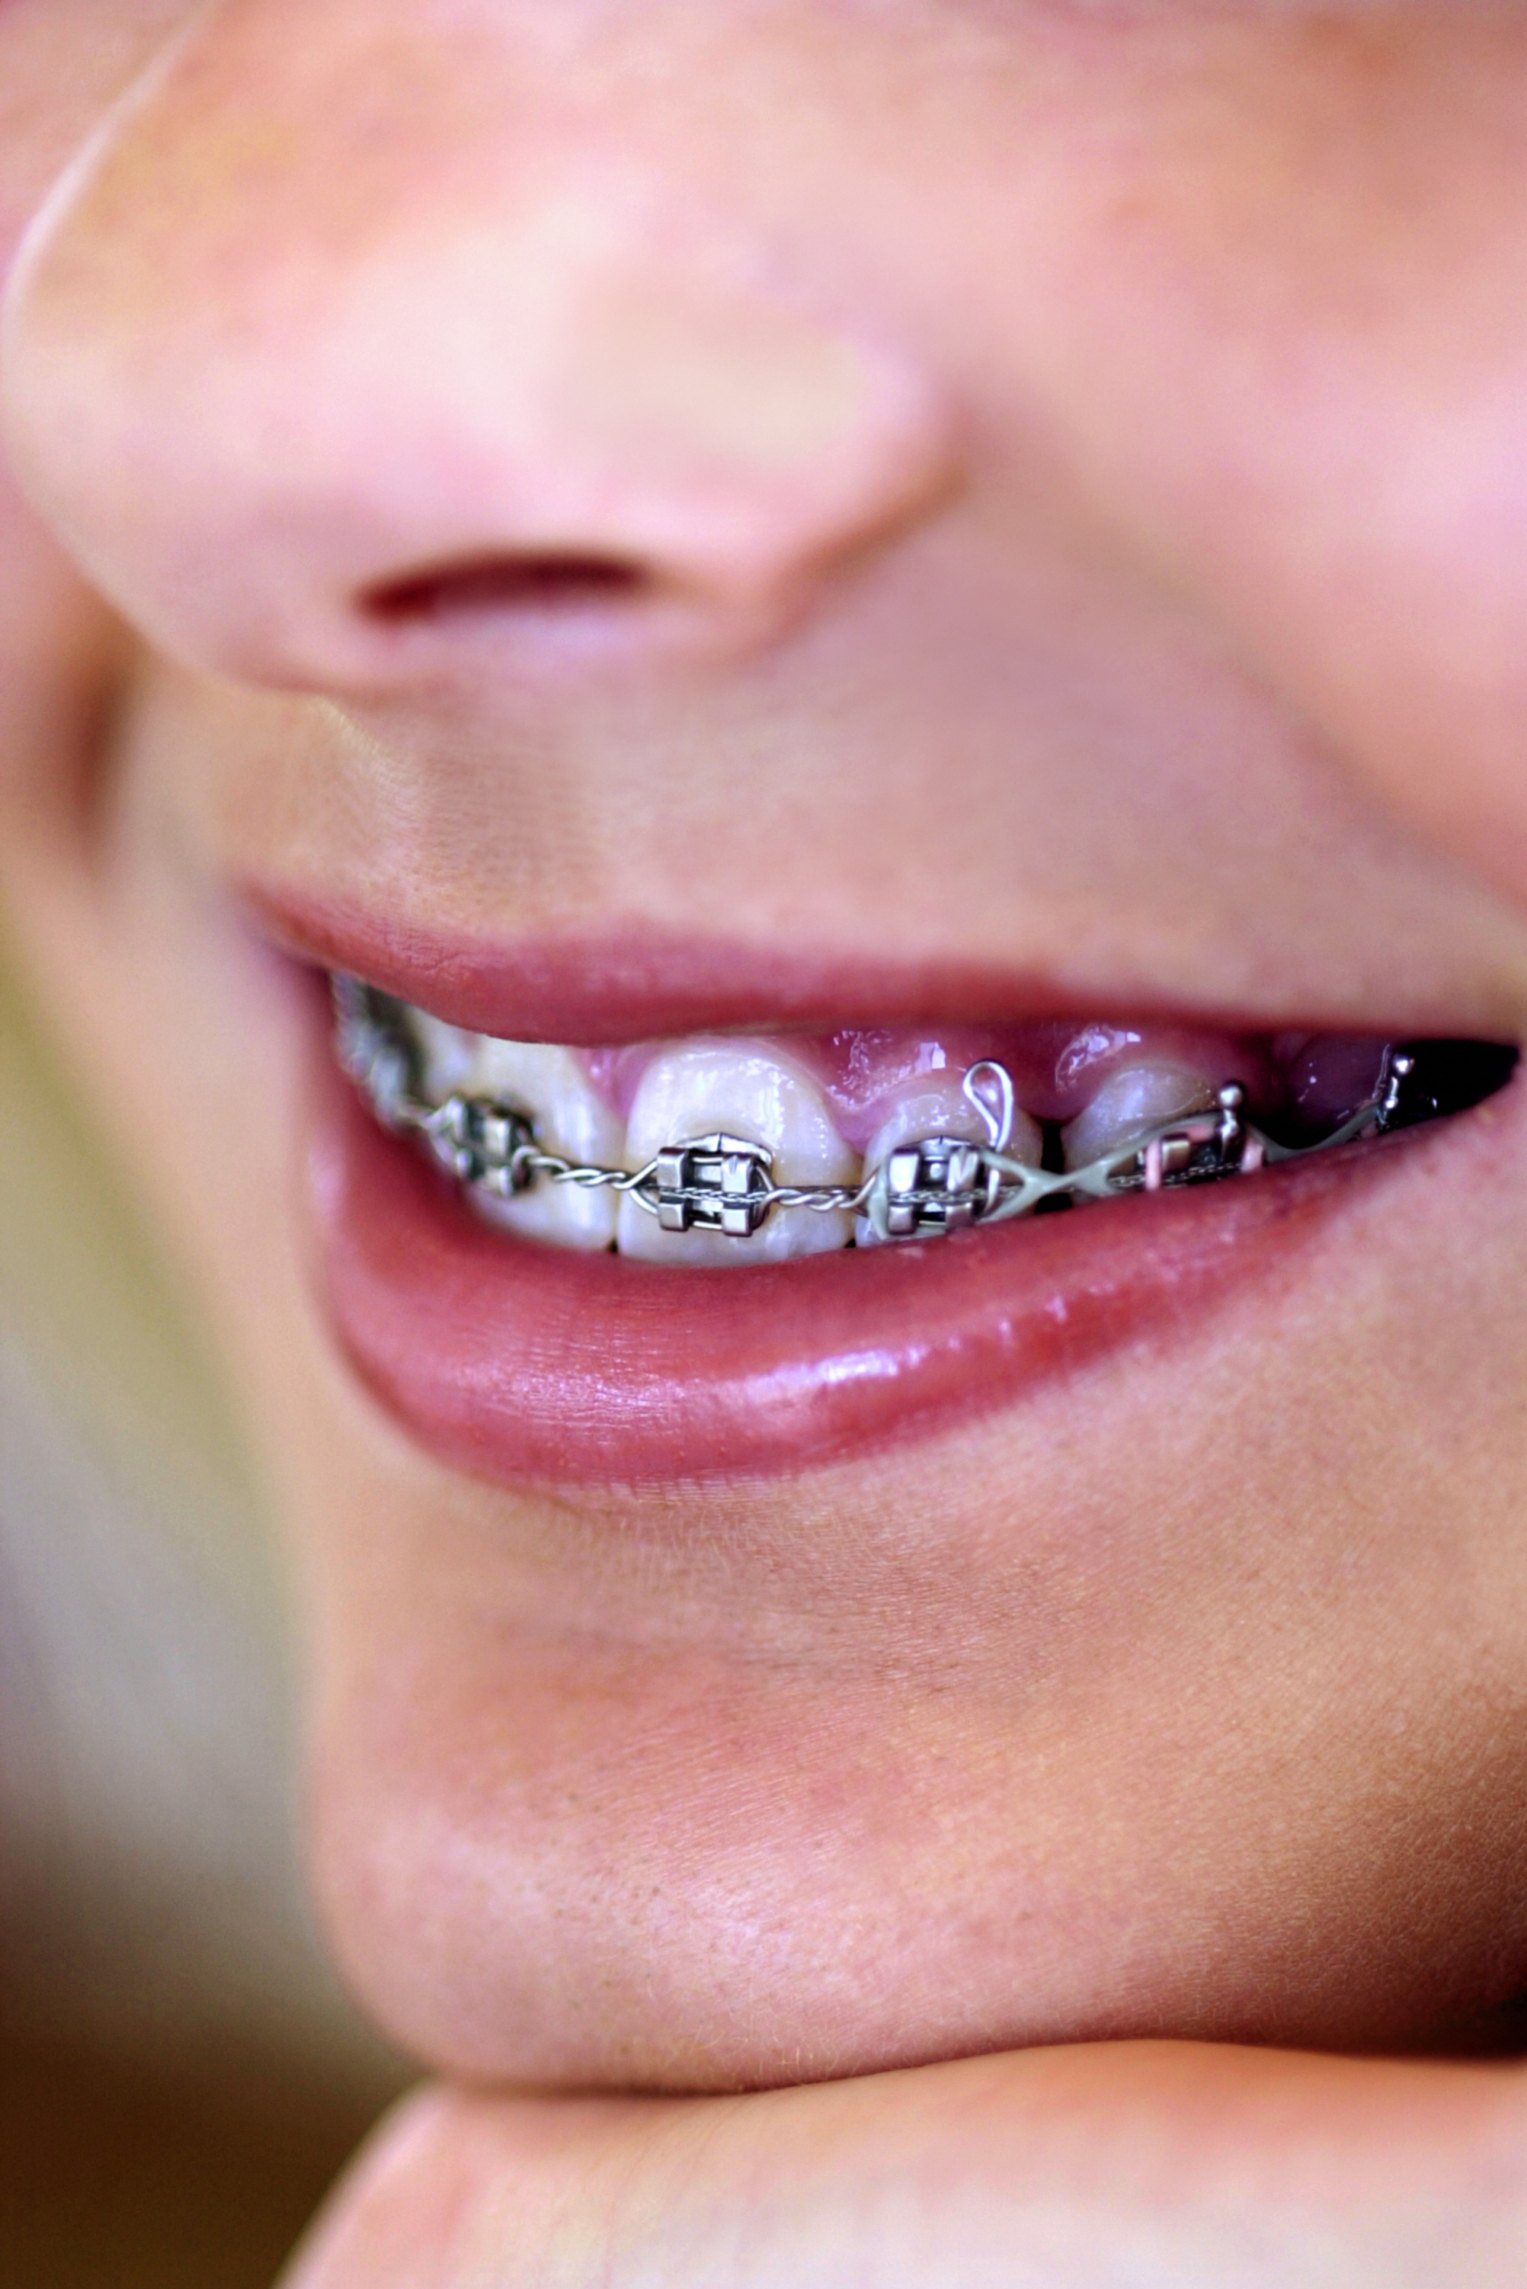 How to Make Brackets for Fake Braces | eHow